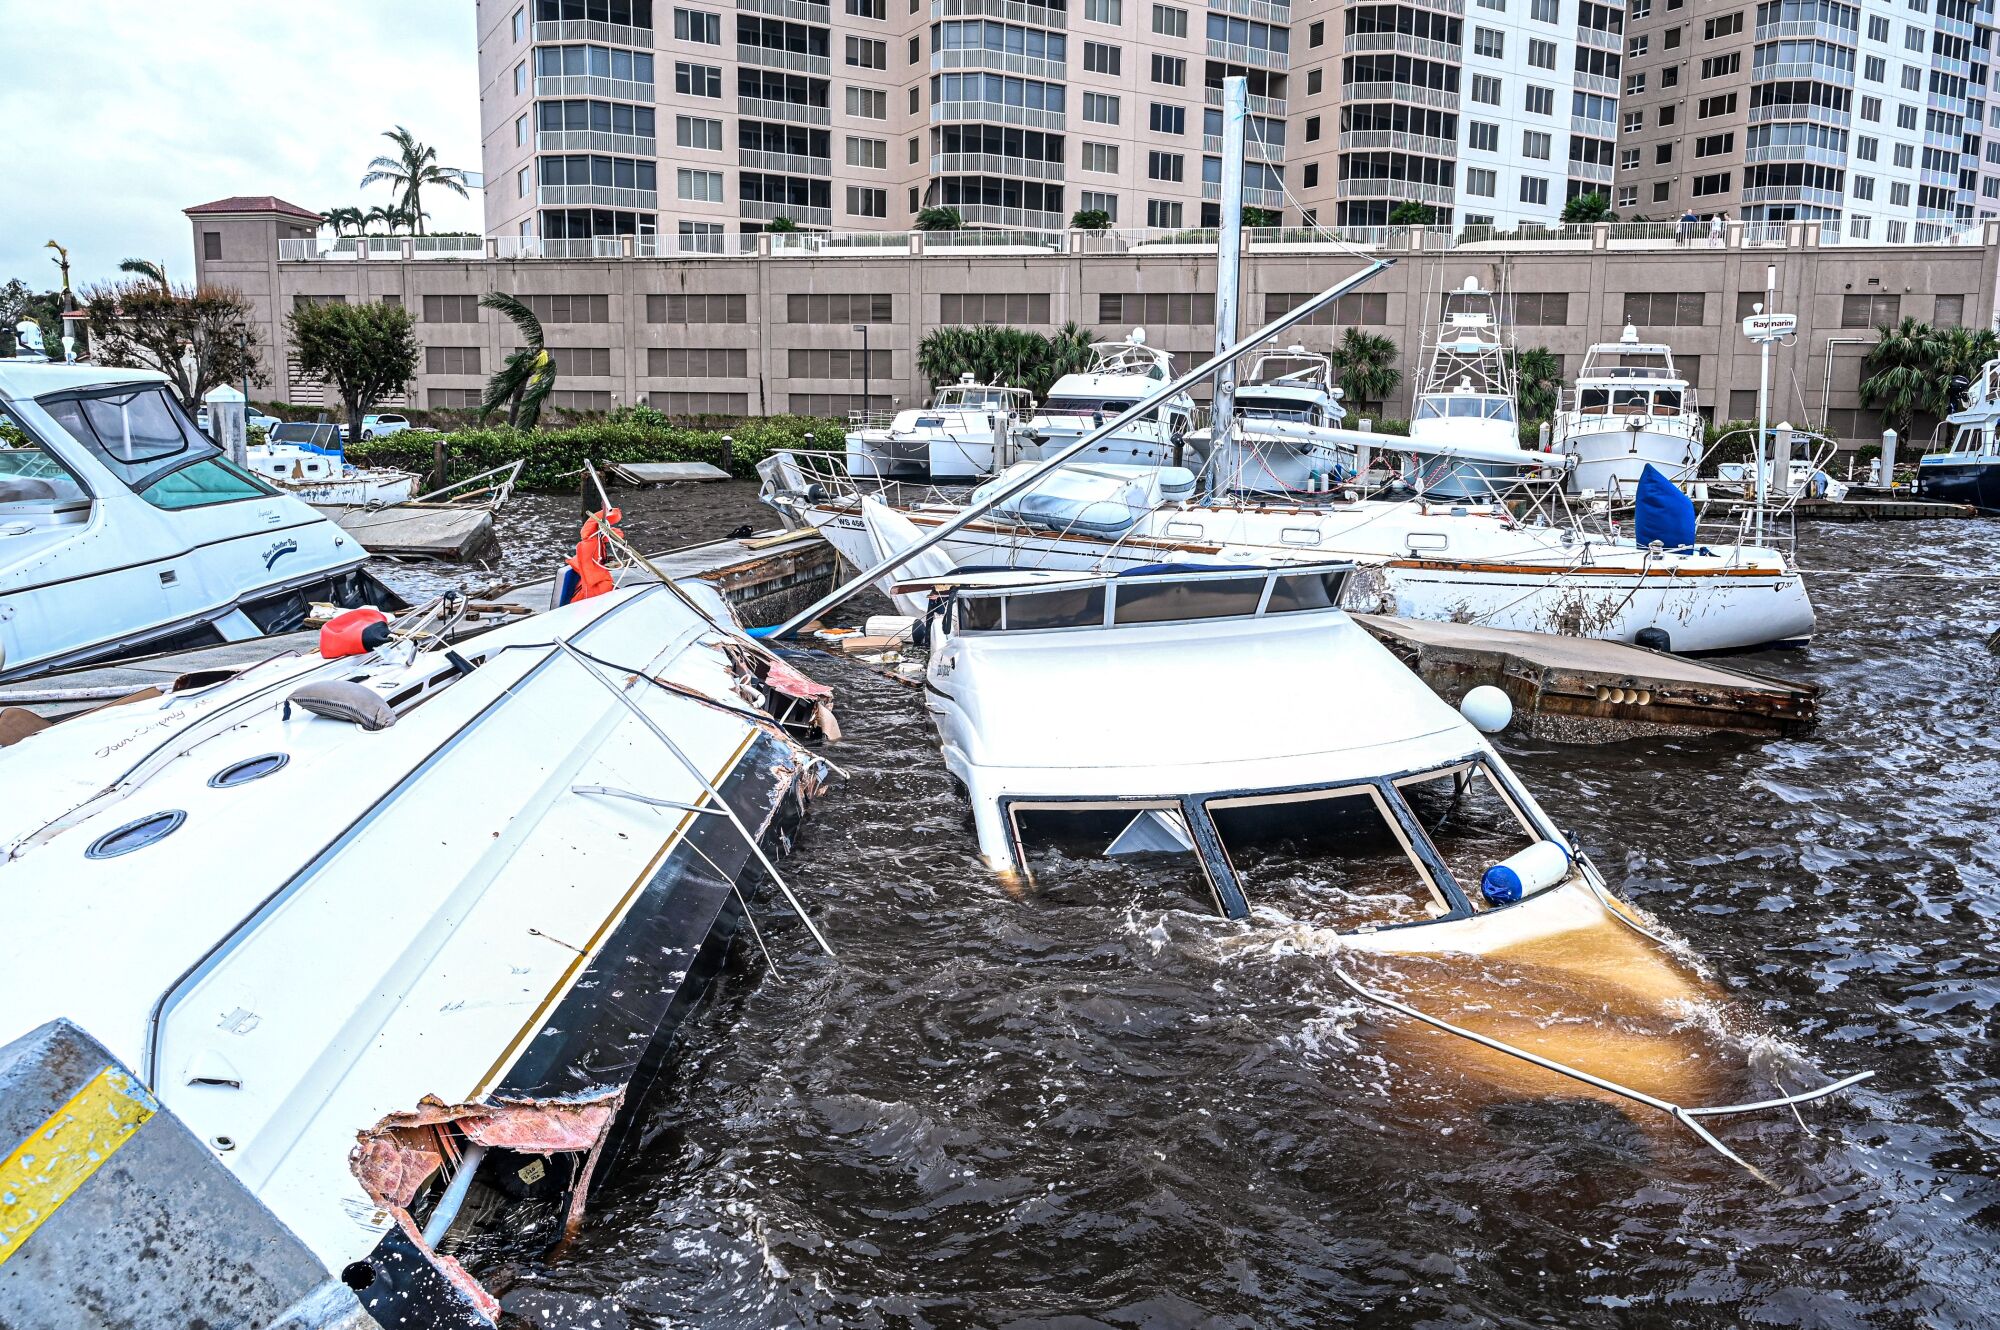 Partly submerged boats in a marina.